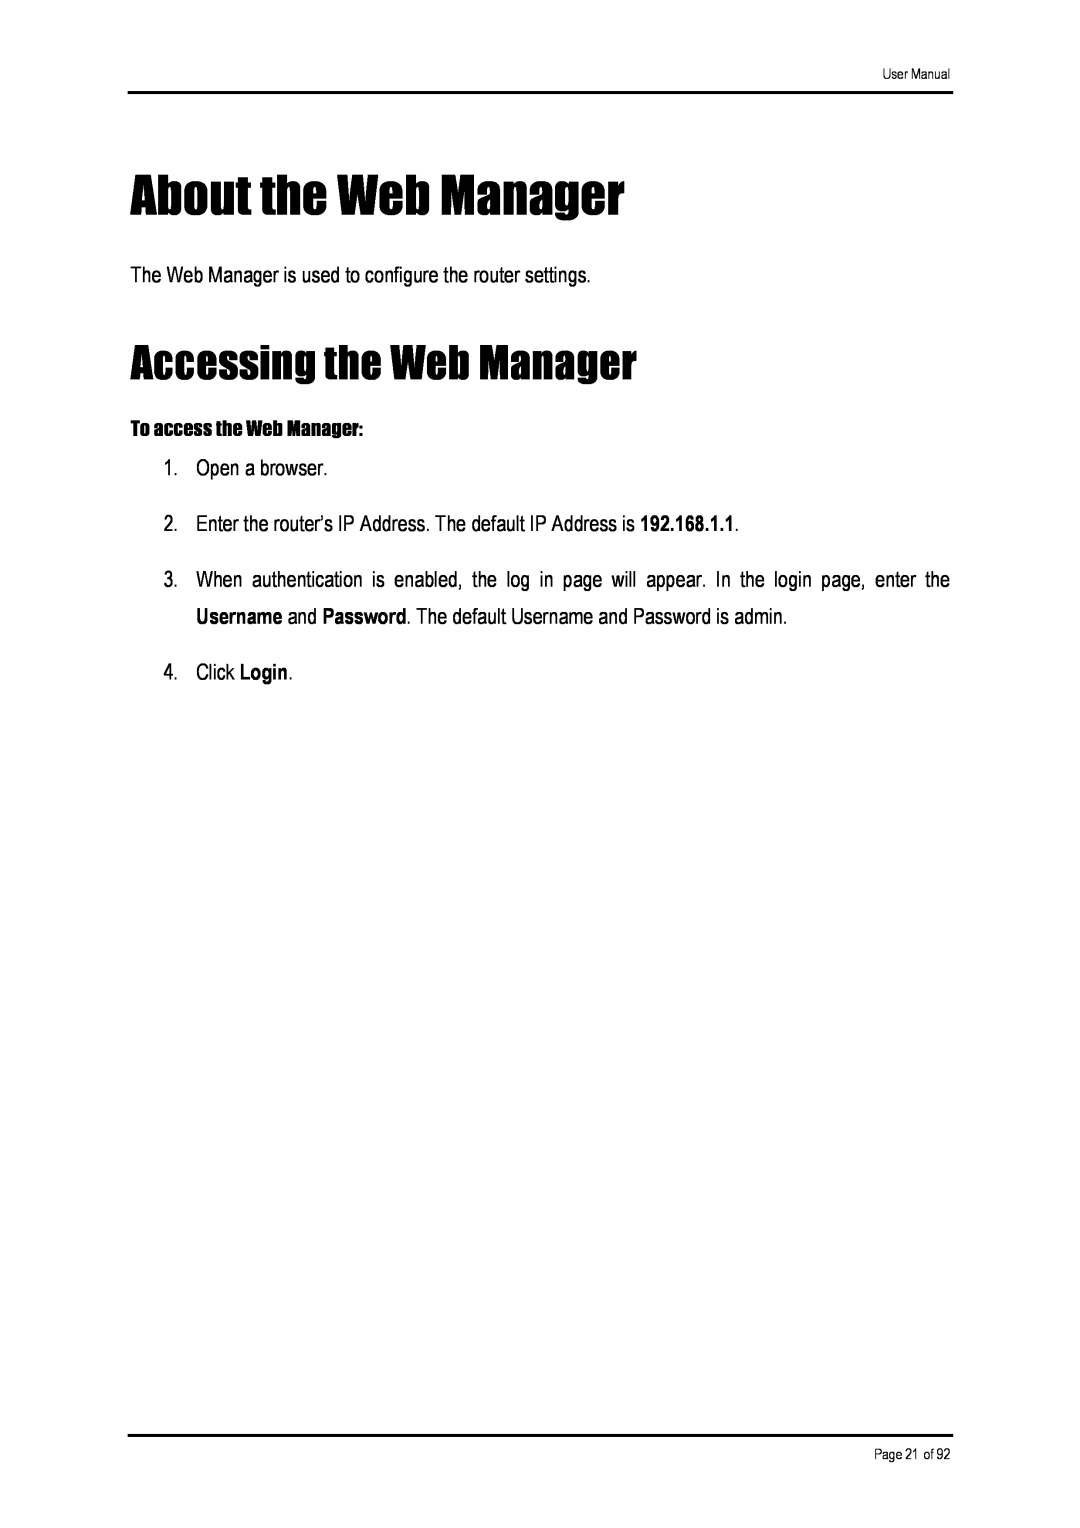 Shiro ADSL 2/2+ Ethernet Modem manual About the Web Manager, Accessing the Web Manager, To access the Web Manager 